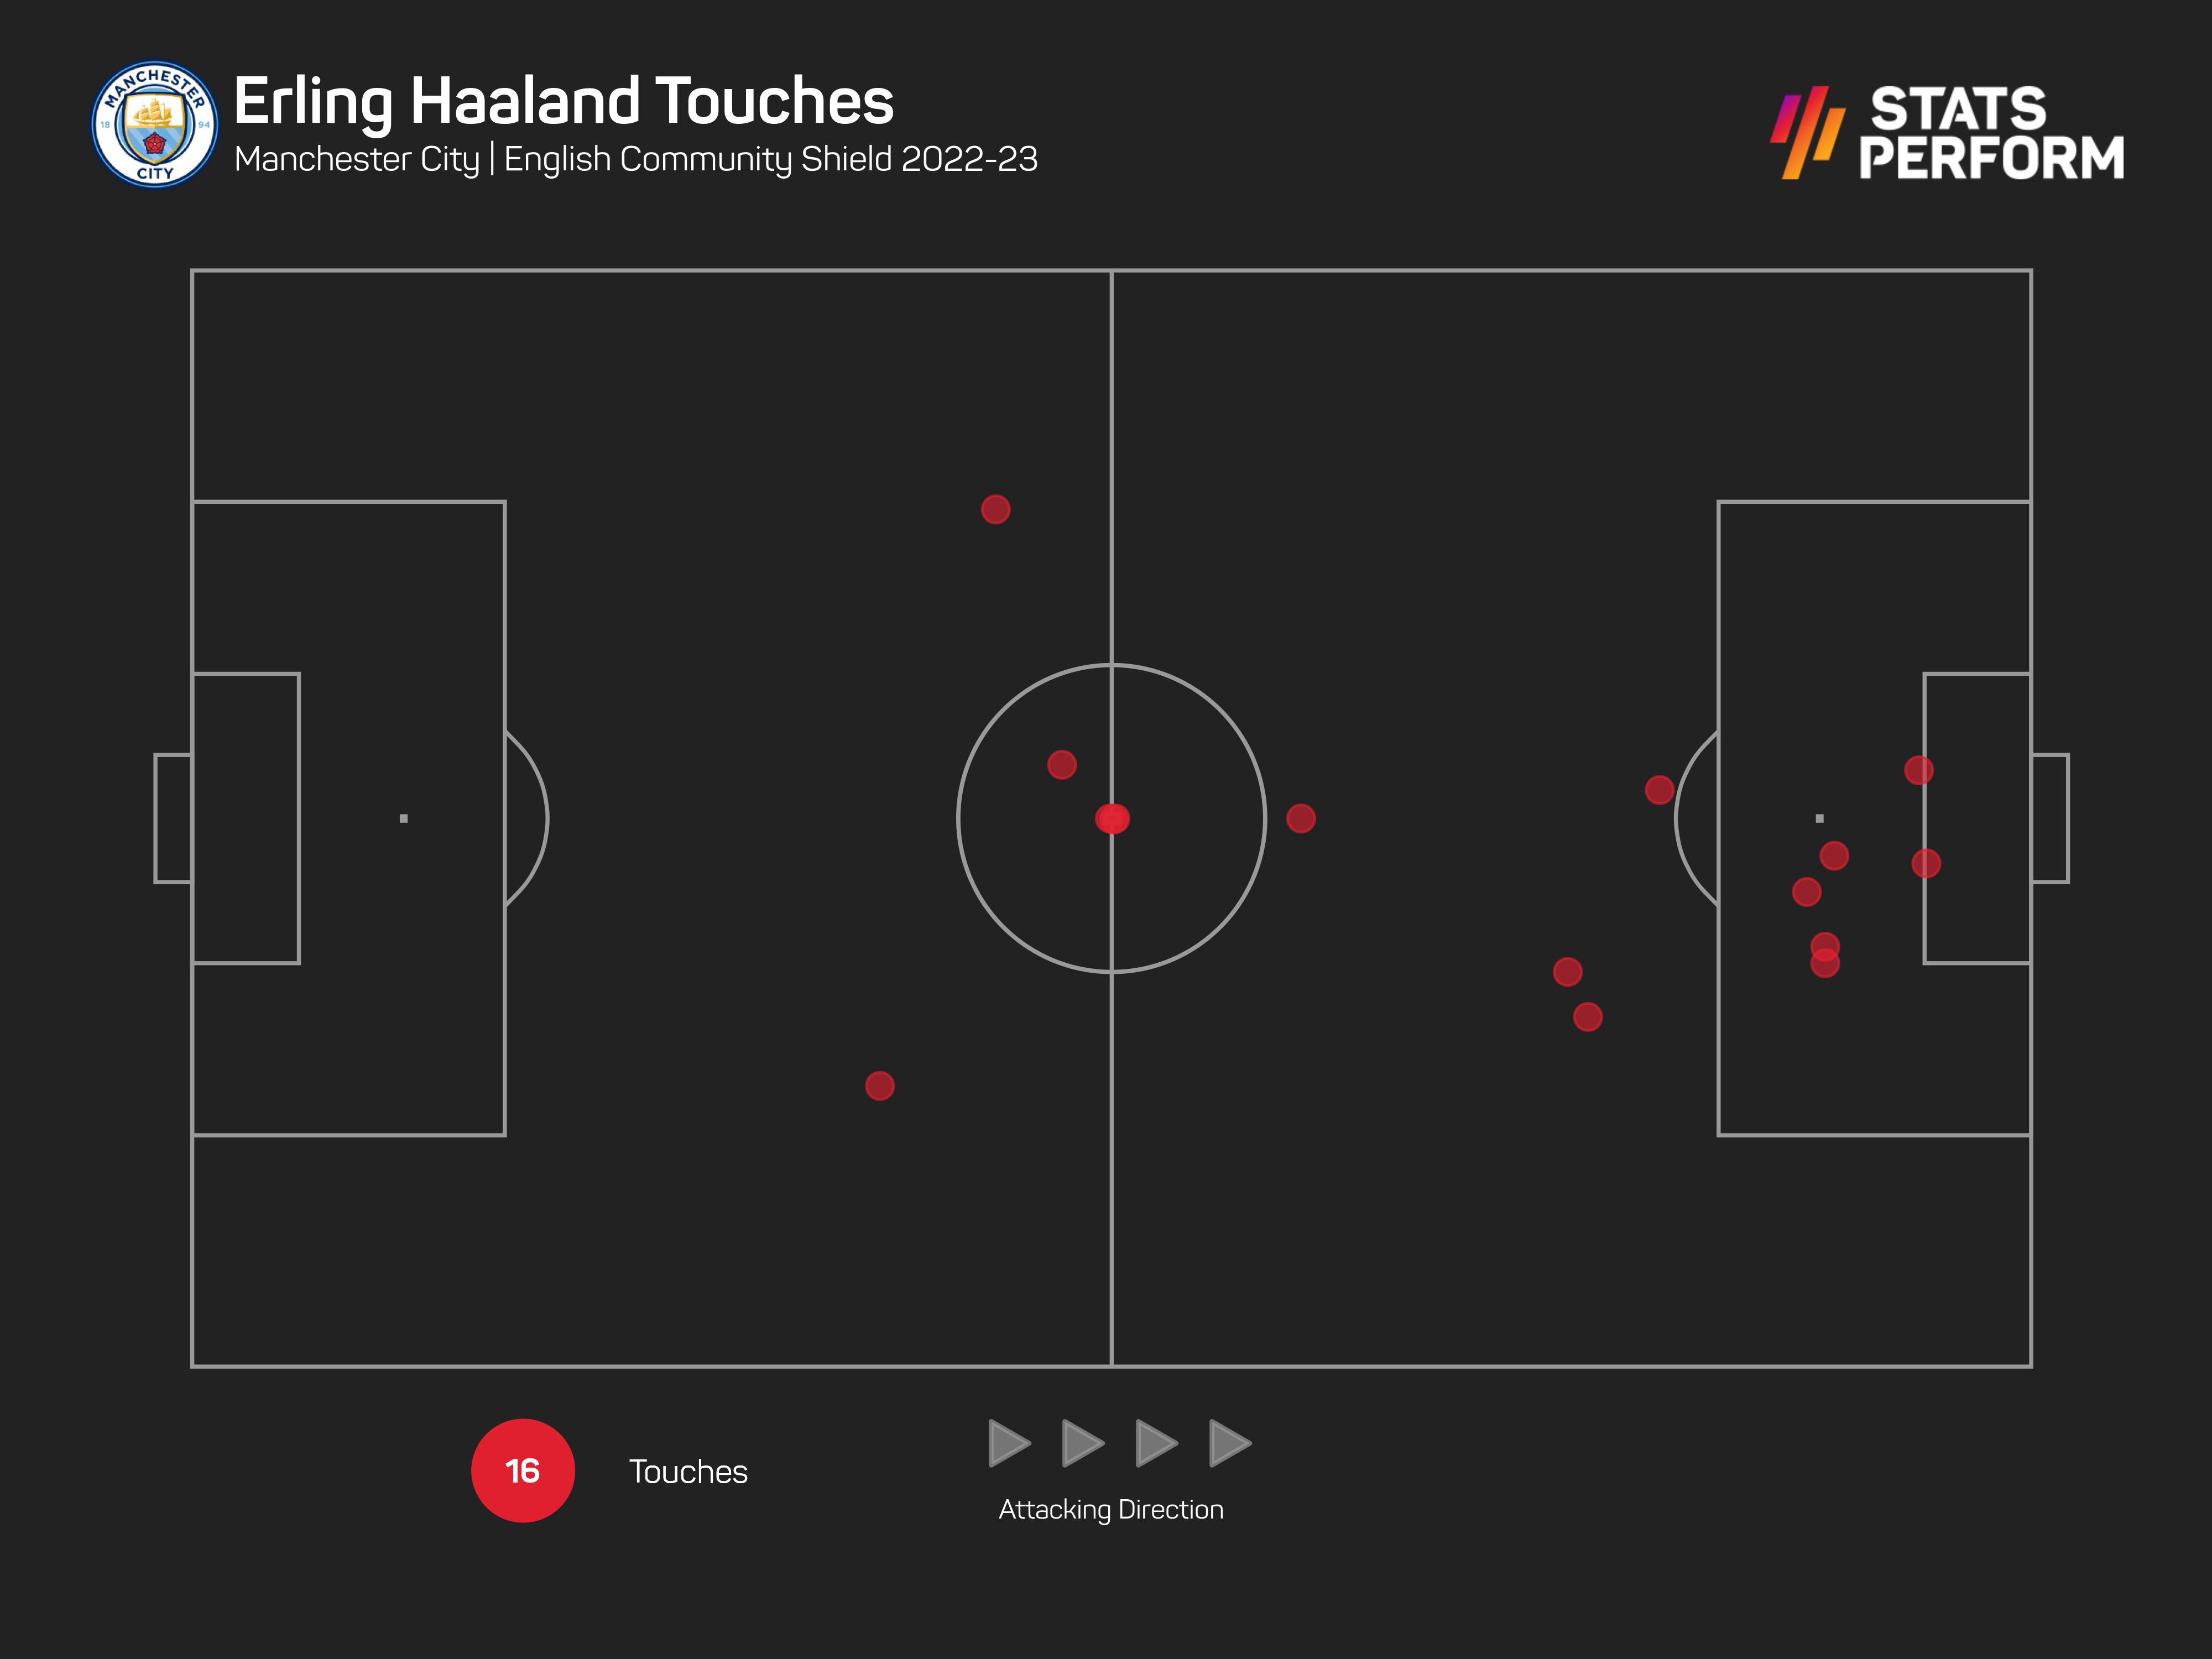 Erling Haaland managed just 16 touches in the Community Shield